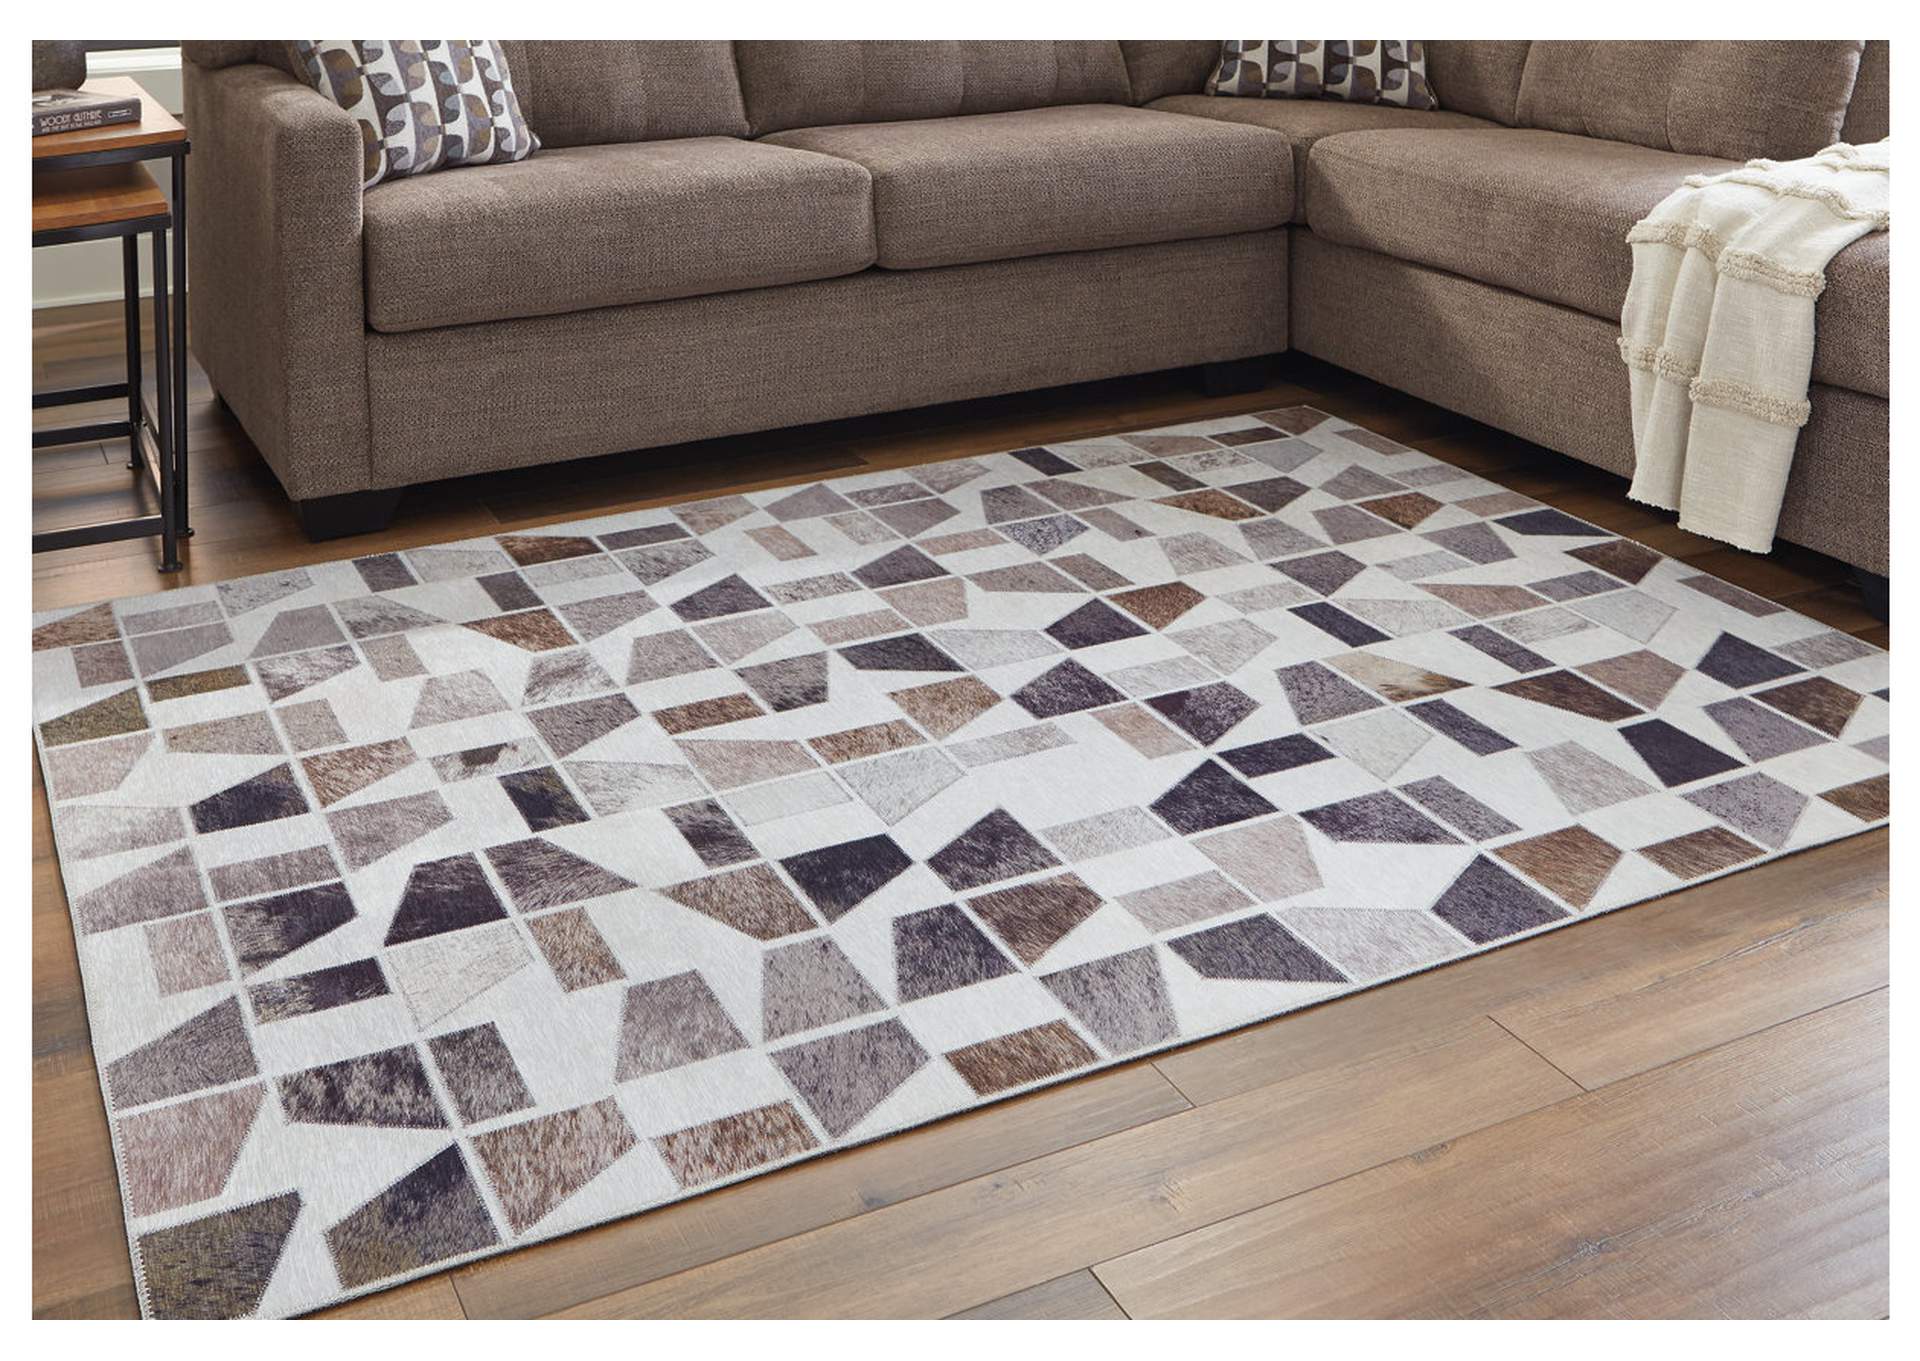 Jettner 5' x 7' Rug,Signature Design By Ashley